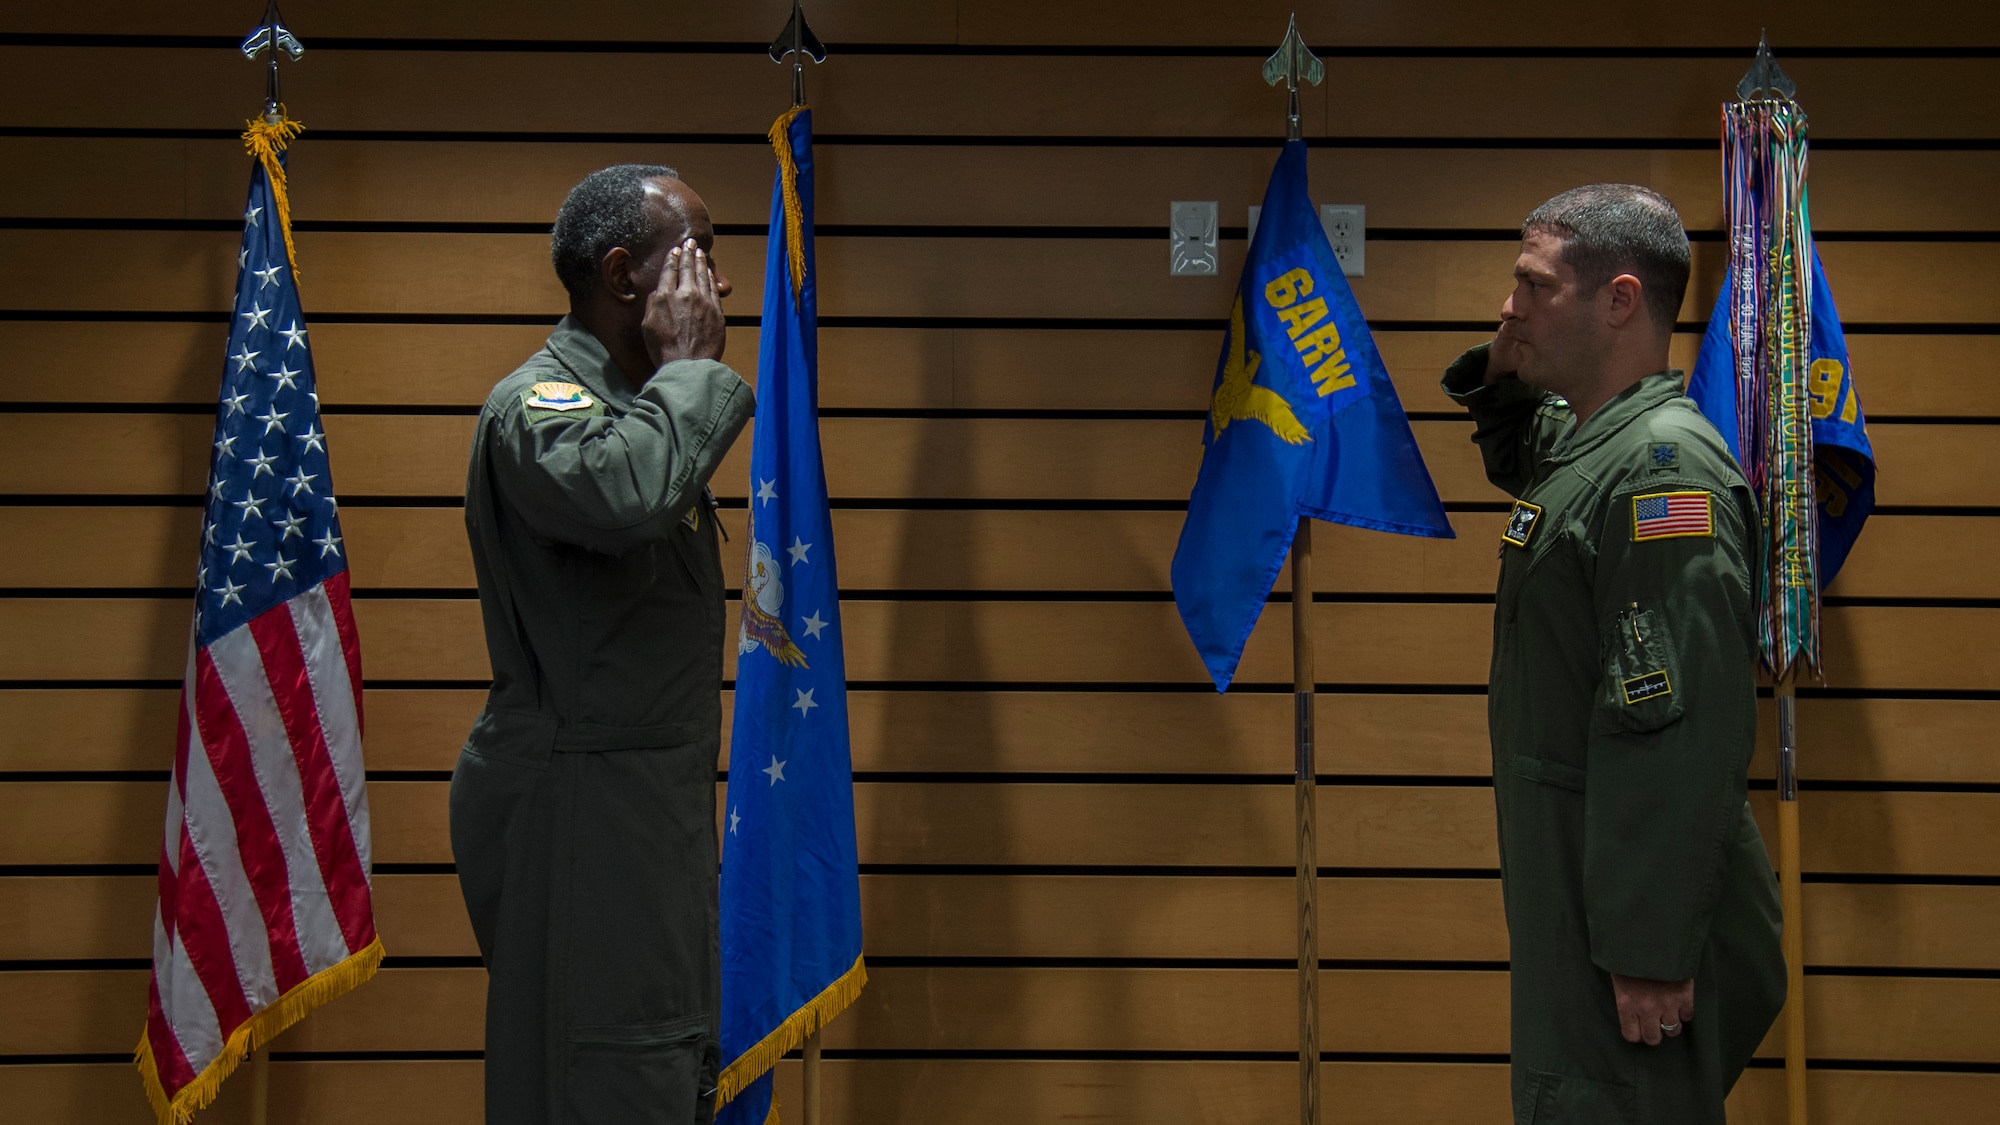 U.S. Air Force Col. Travis Edwards, the 6th Operations Group commander salutes Lt. Col. Ivan Blackwell, the 91st Air Refueling Squadron commander during a change of command ceremony, June 5, 2020, at MacDill Air Force Base, Fla.